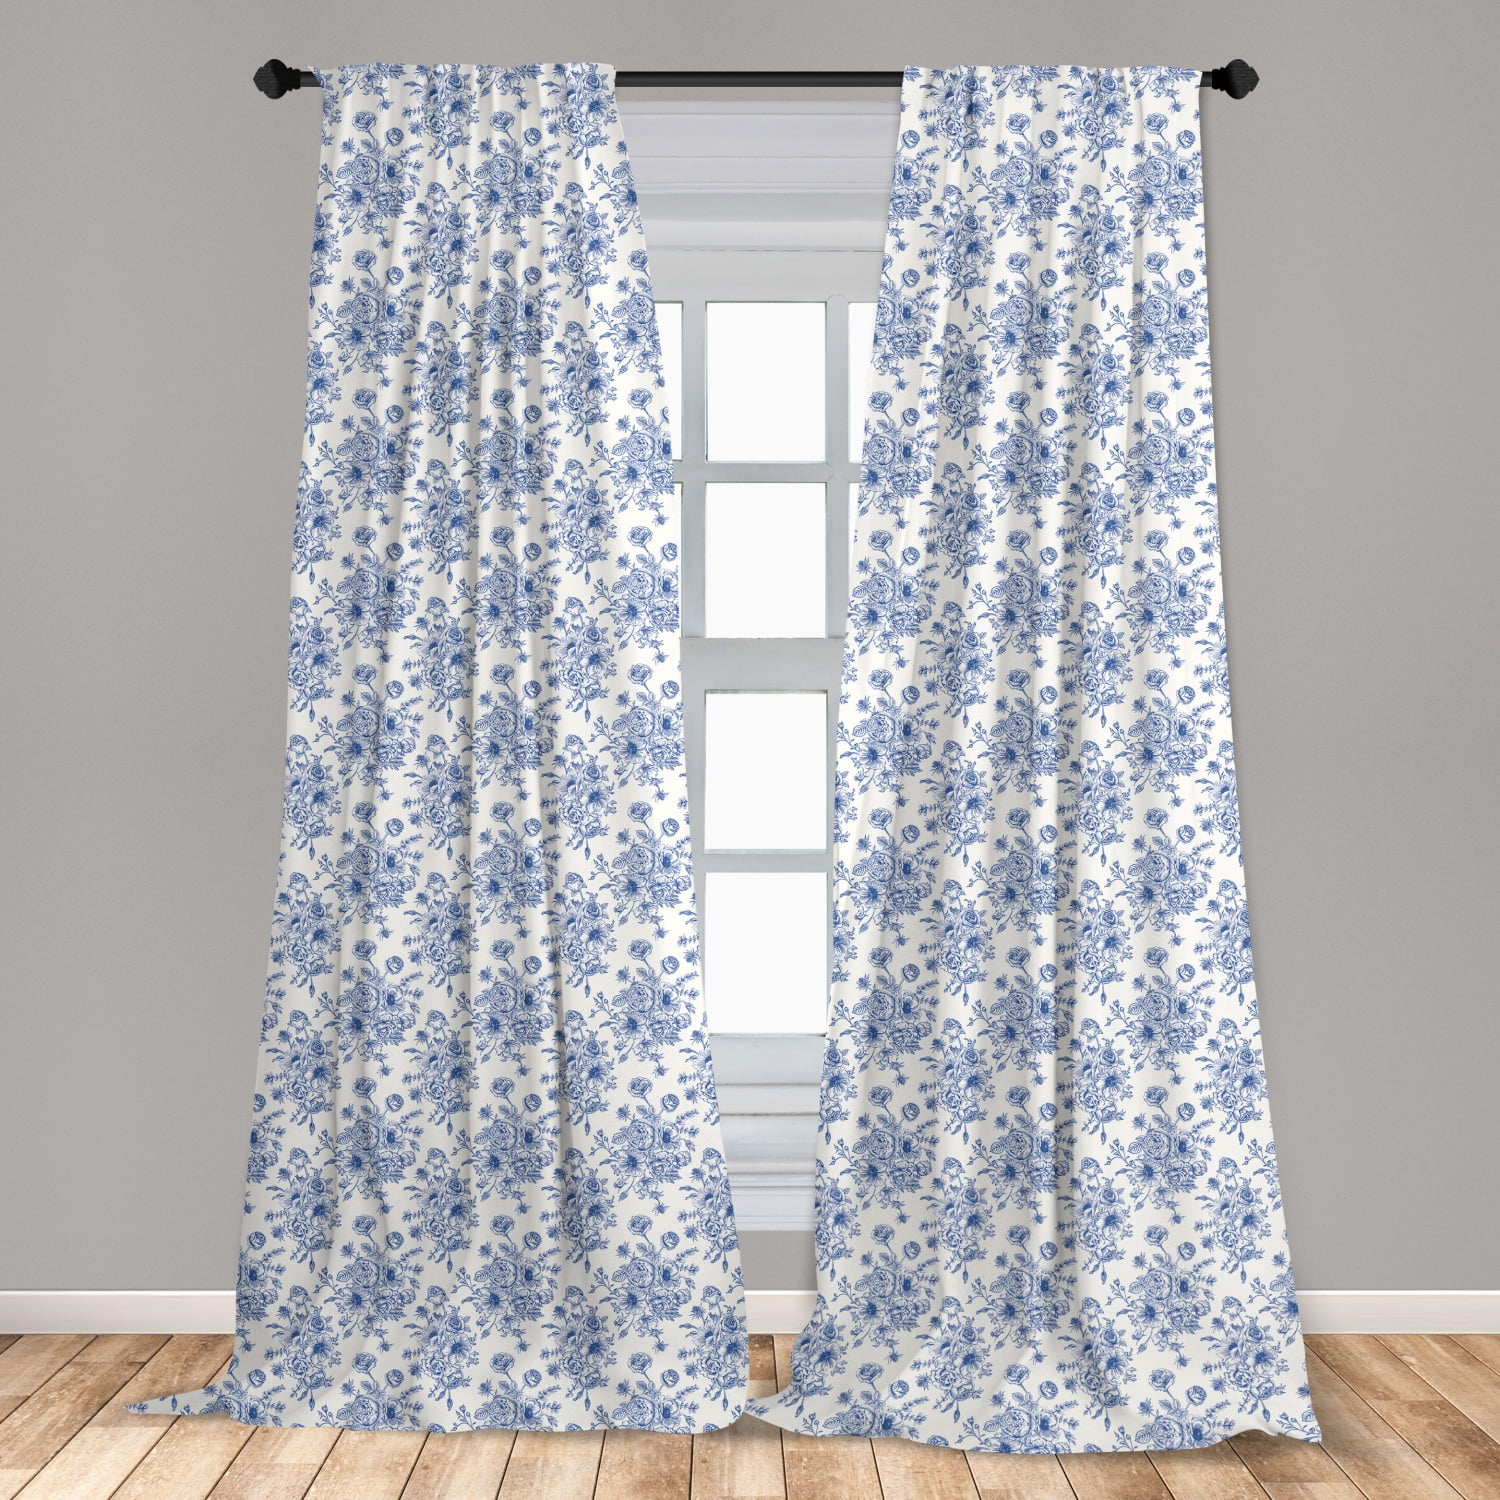 Anemone Flower Curtains 2 Panels Set, Floral Pattern with Bouquet of Blue  Flowers Delicate Victorian Design, Window Drapes for Living Room Bedroom,  56